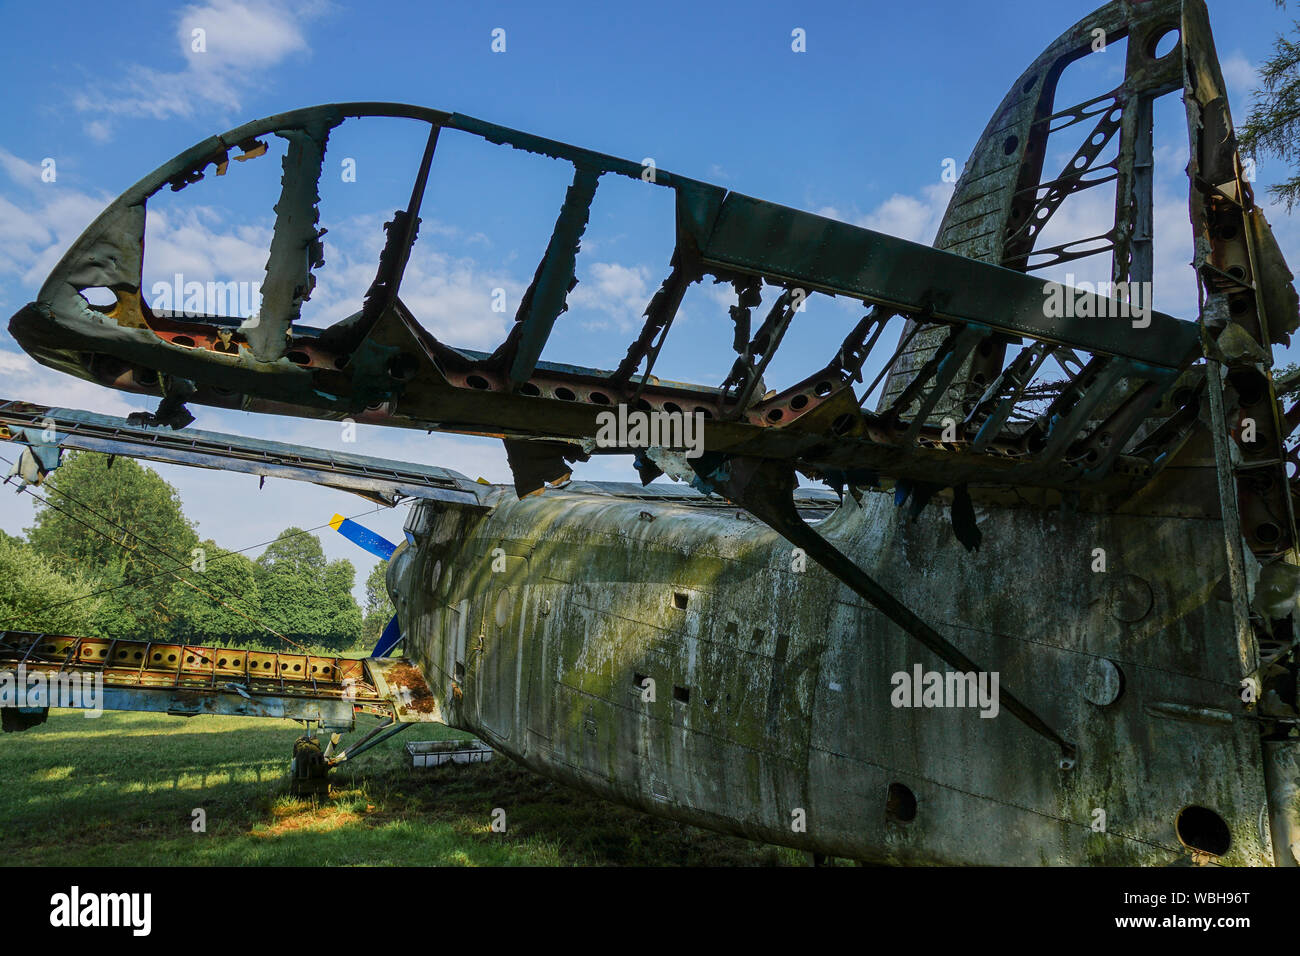 Rotting planes: Tail rudder construction of a derelict Antonow An-2 Stock Photo